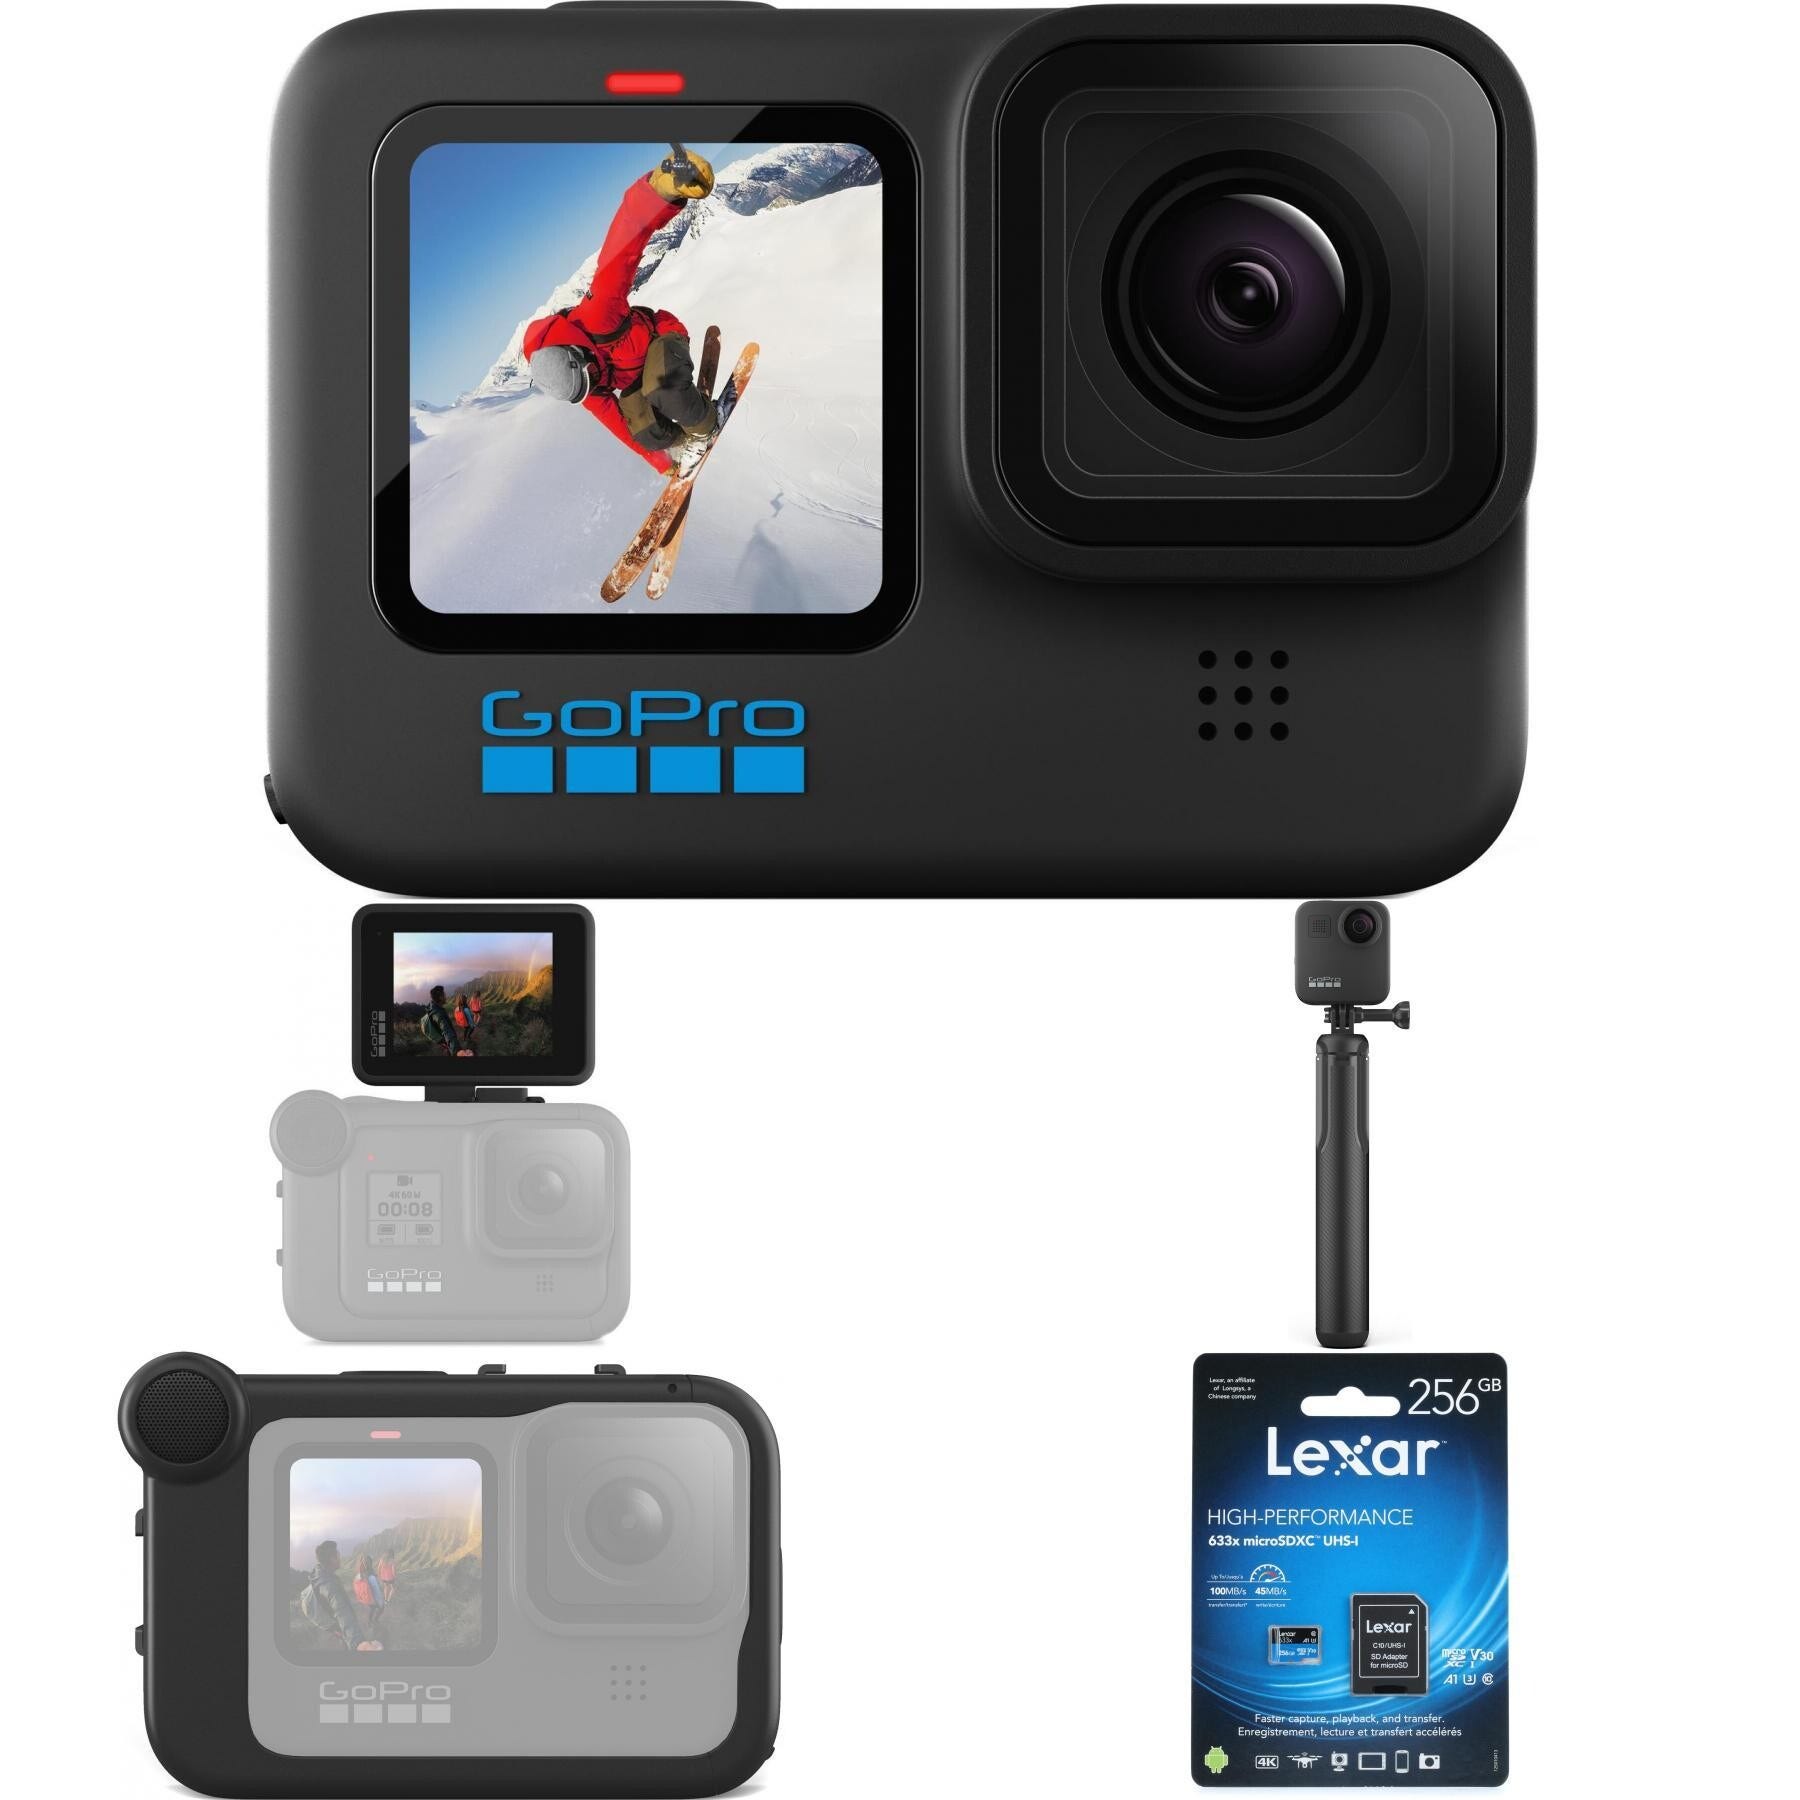 GoPro HERO12 Black Camera Bundle: Waterproof Action Cam with Go Pro Max  Lens Mod 2.0 for Hero 12 Camera and 64GB Micro SD Card for Ultimate Video